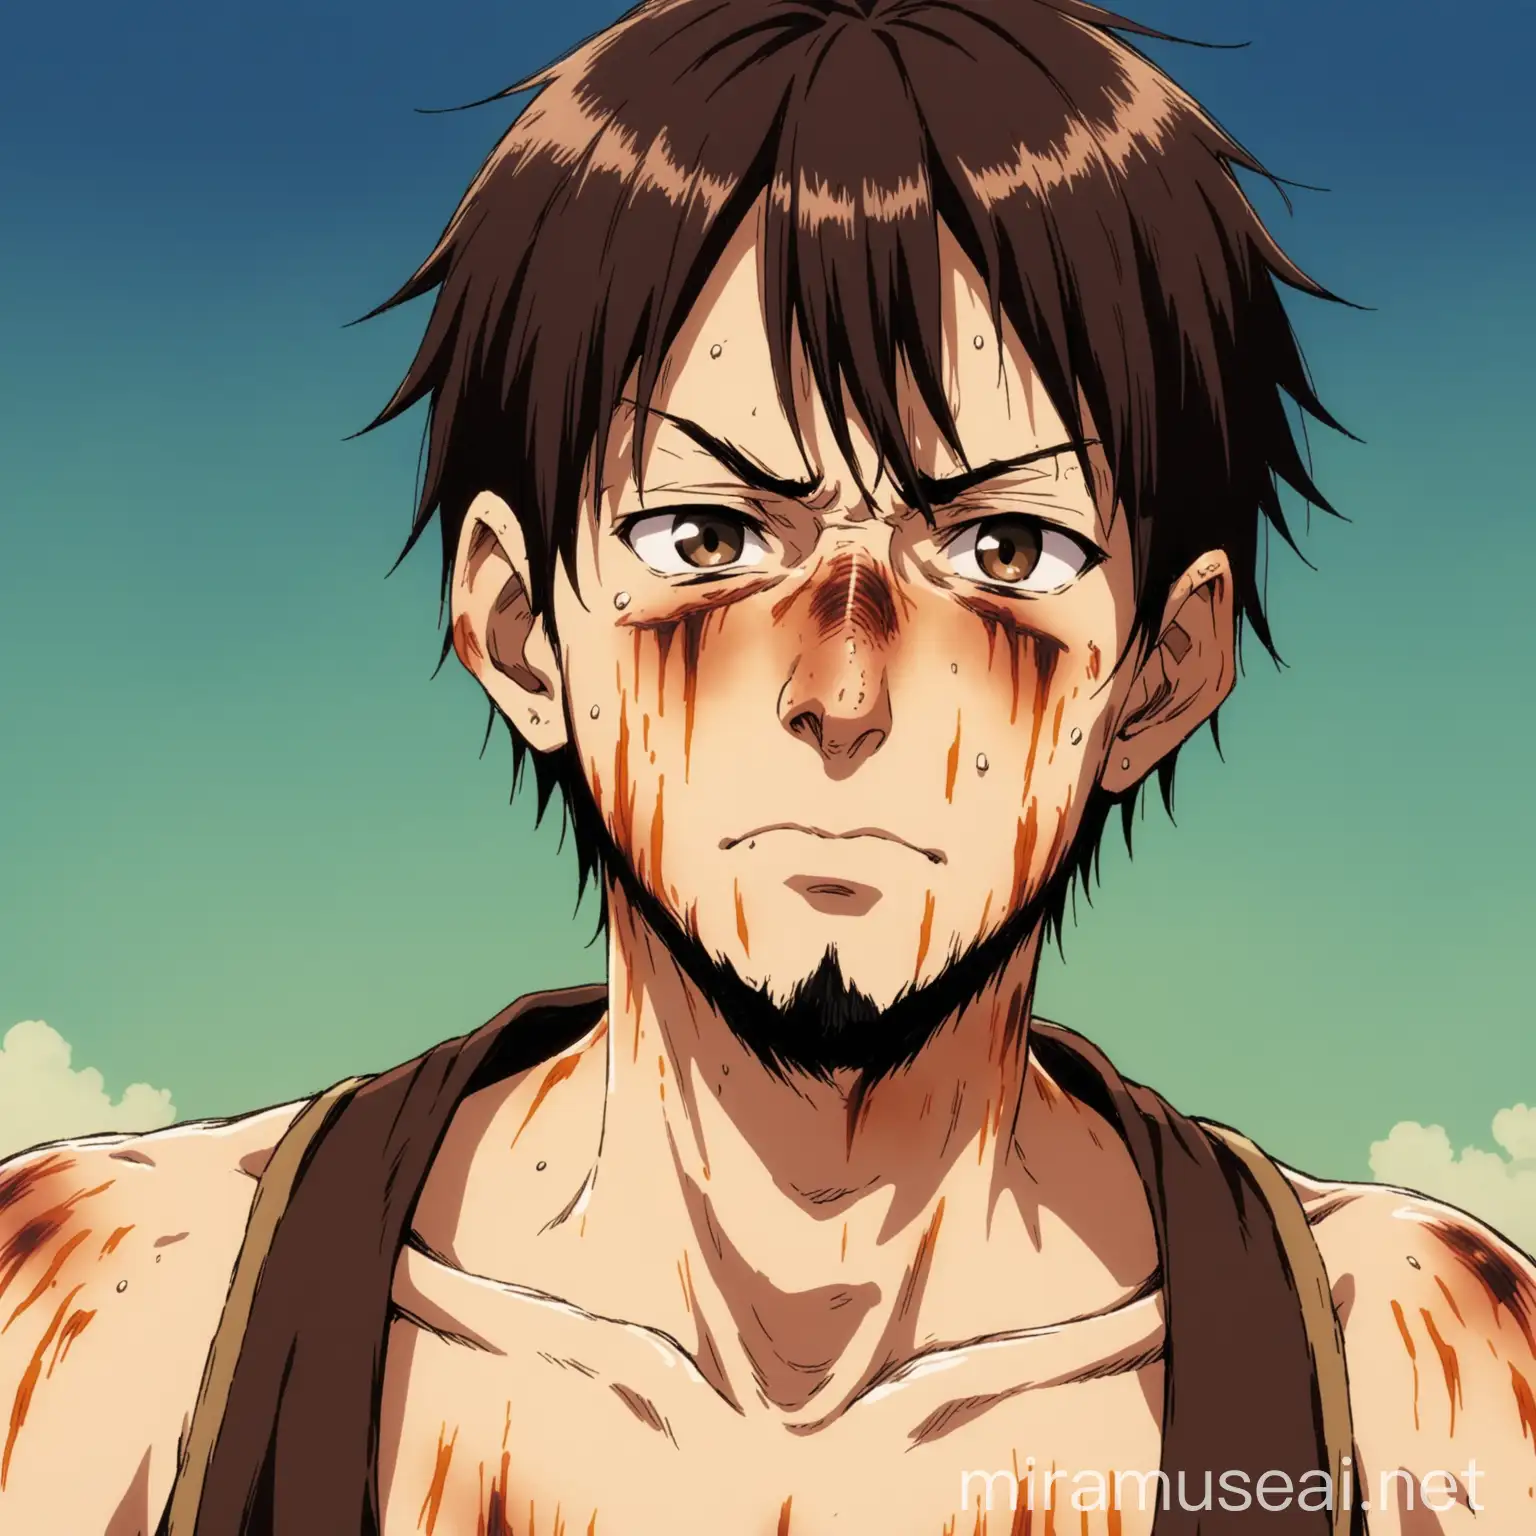 a thin pirate man, ugly and with little hair, dressed in a simple horizontal striped shirt, has several burns on his body, brown eyes, pronounced nose. in anime